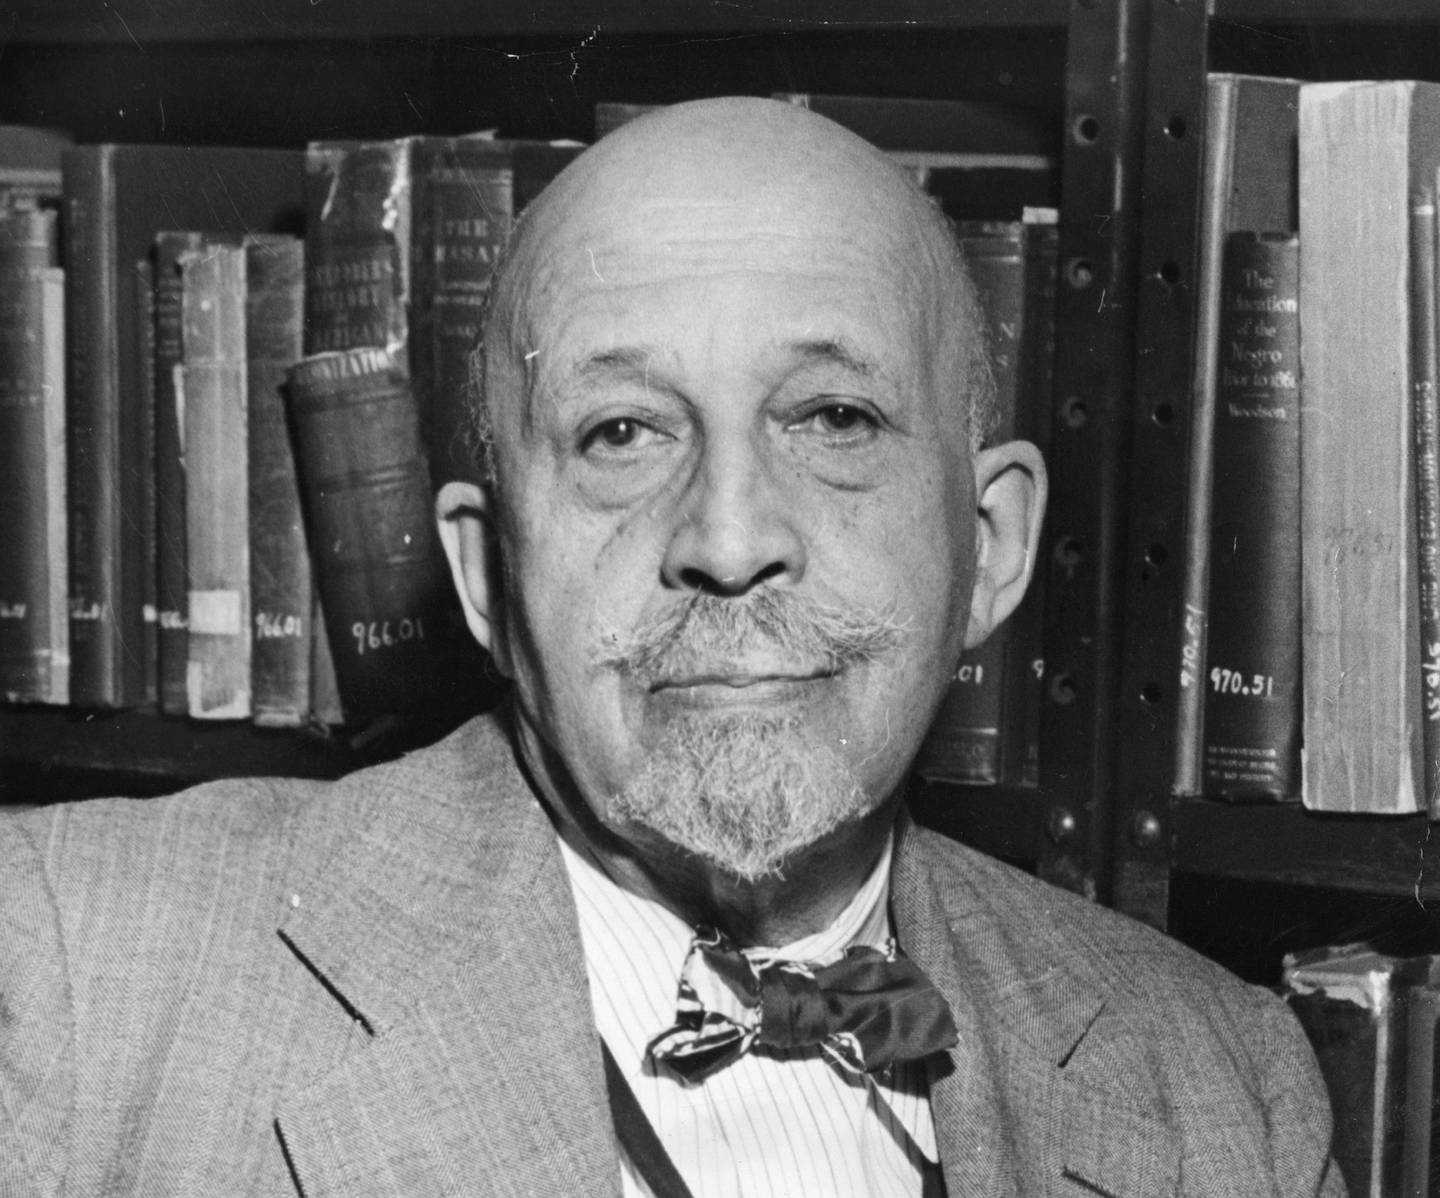 Dr William Edward Burghardt Du Bois (1868 - 1963), 82-year old anthropologist and publicist, co-founder of the National Association for the Advancement of Coloured People (NAACP) who has been nominated as the American Labor Party candidate for Senator from New York.